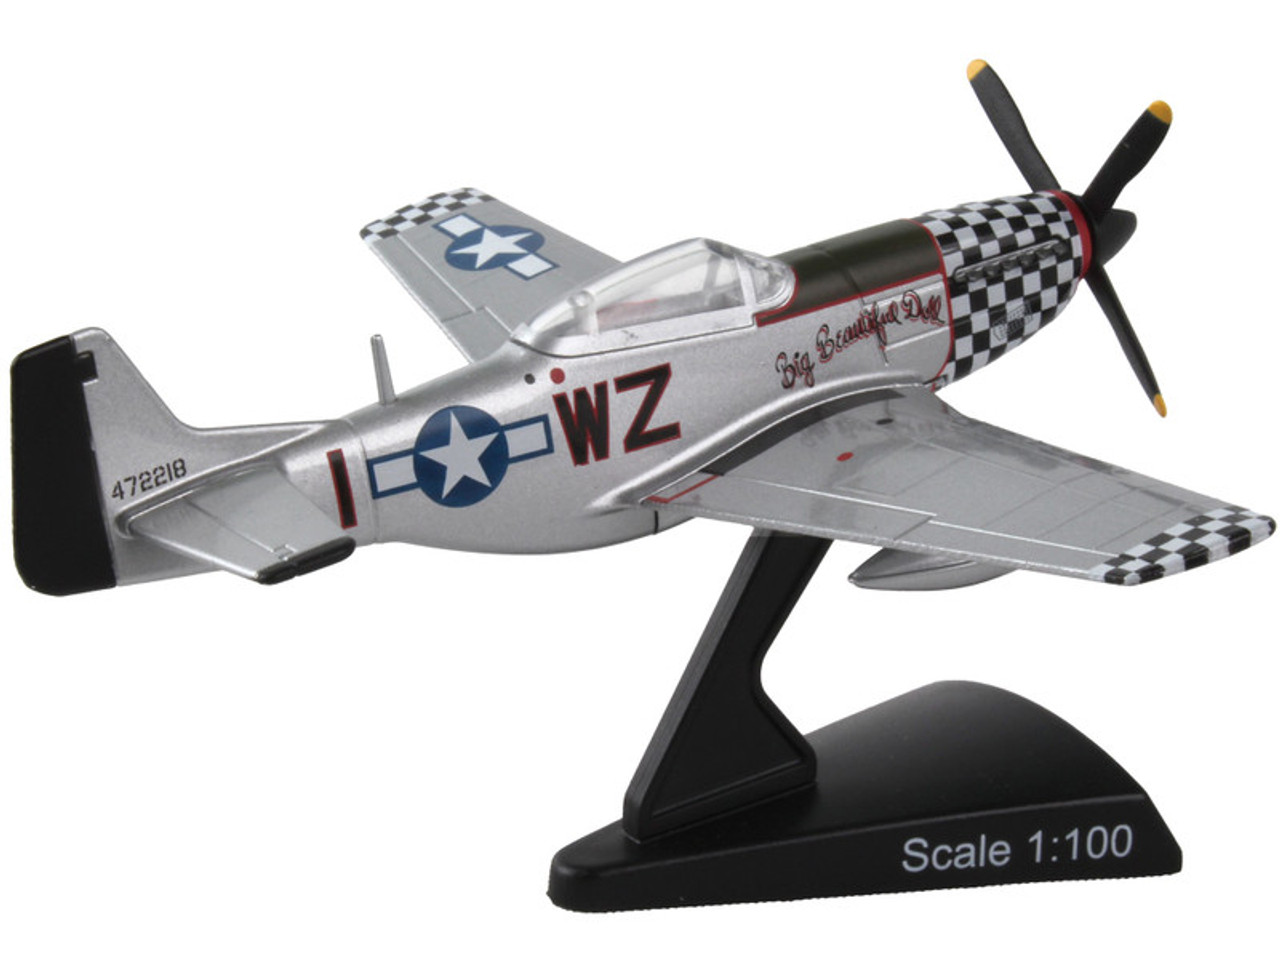 North American P-51D Mustang Fighter Aircraft "Big Beautiful Doll" United States Army Air Forces 1/100 Diecast Model Airplane by Postage Stamp